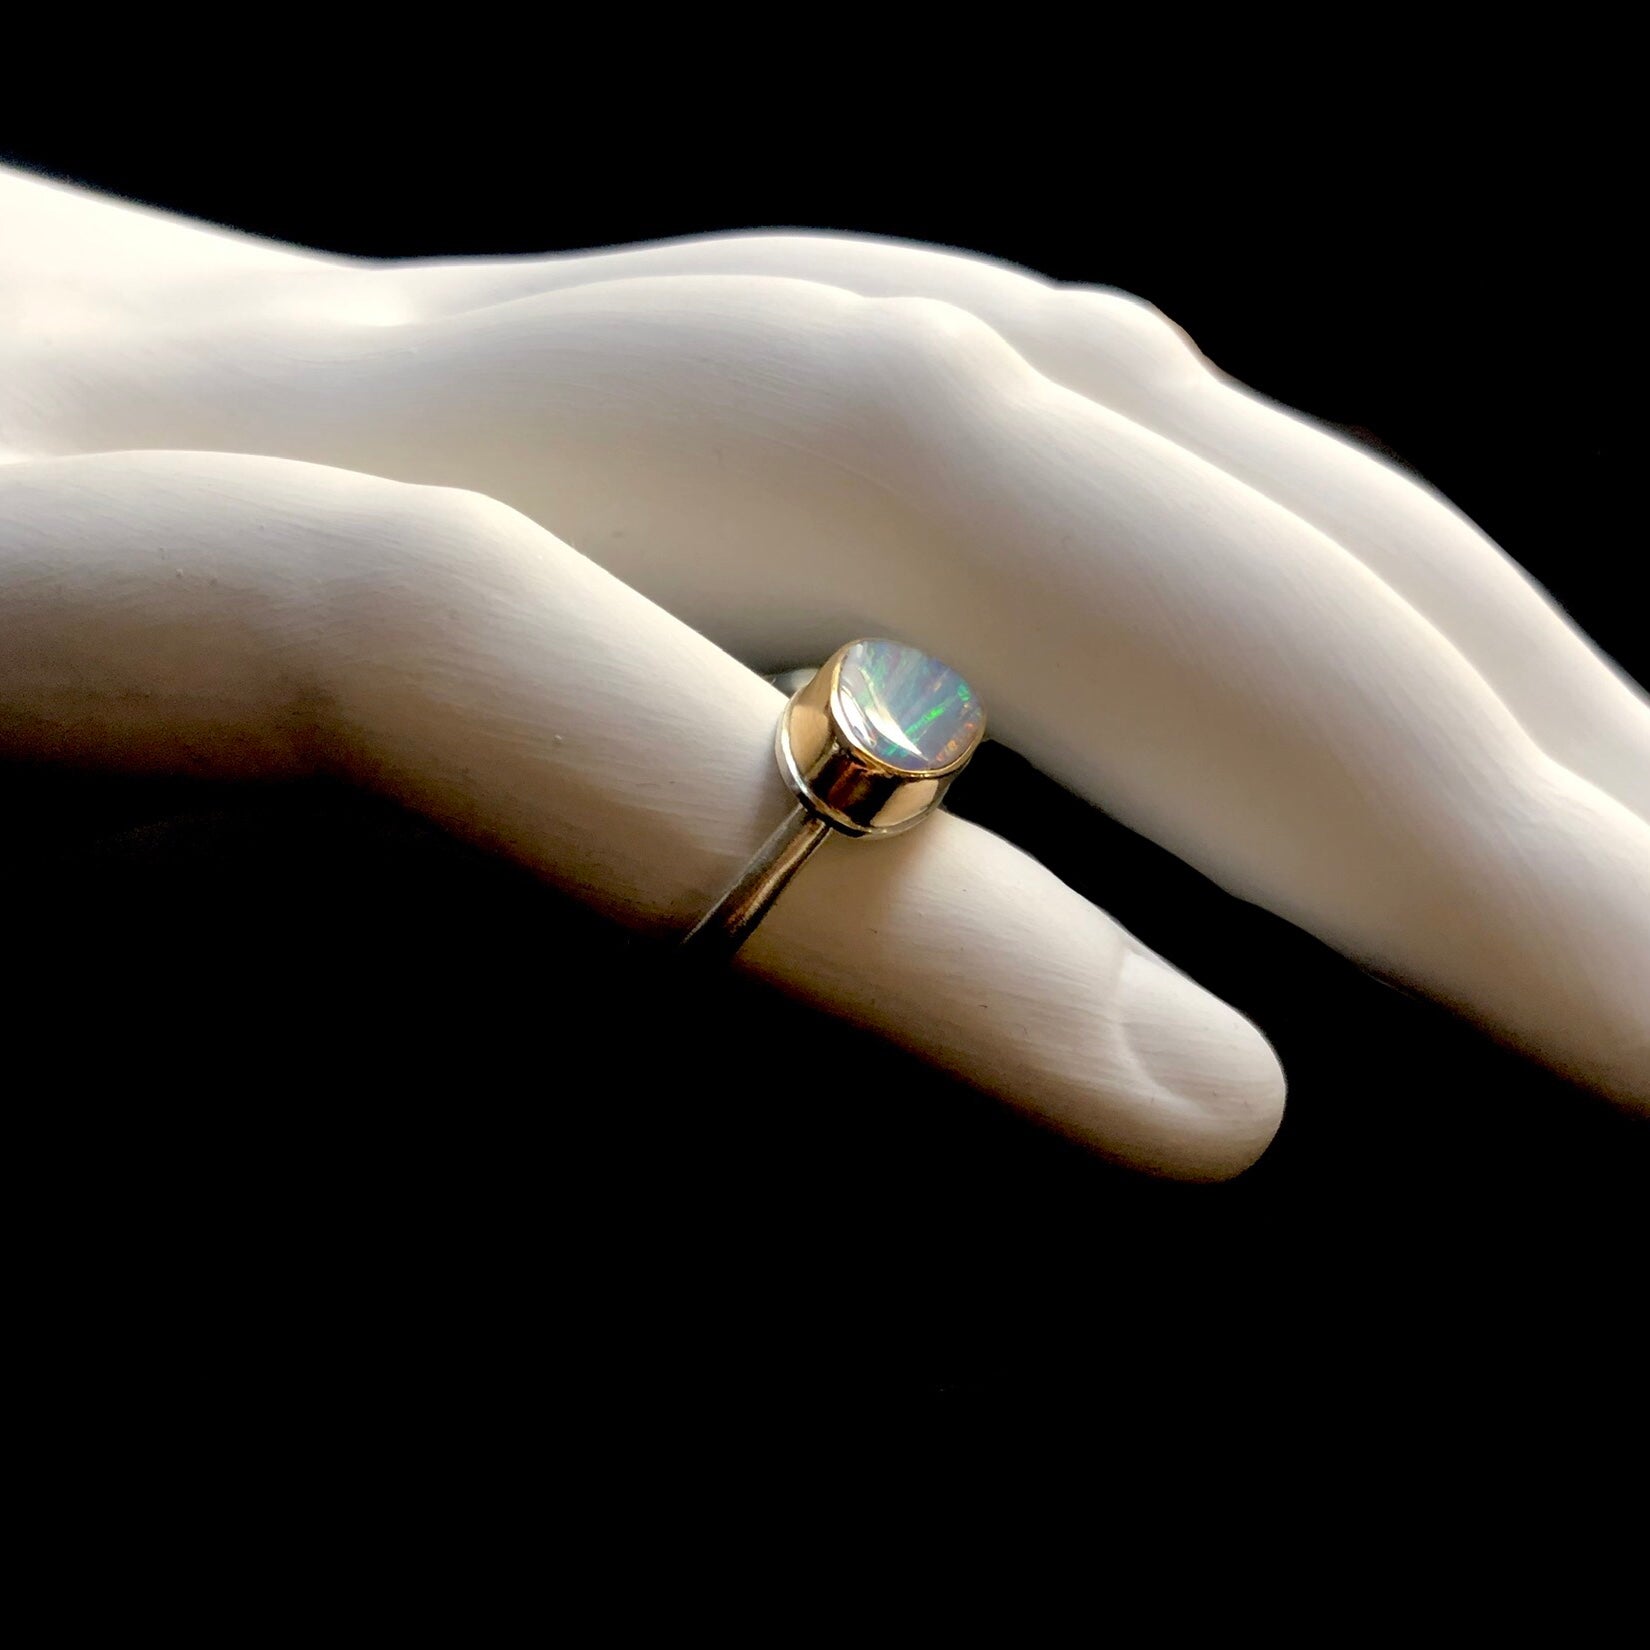 Side profile view of boulder opal ring with gold setting and silver band shown on white ceramic finger